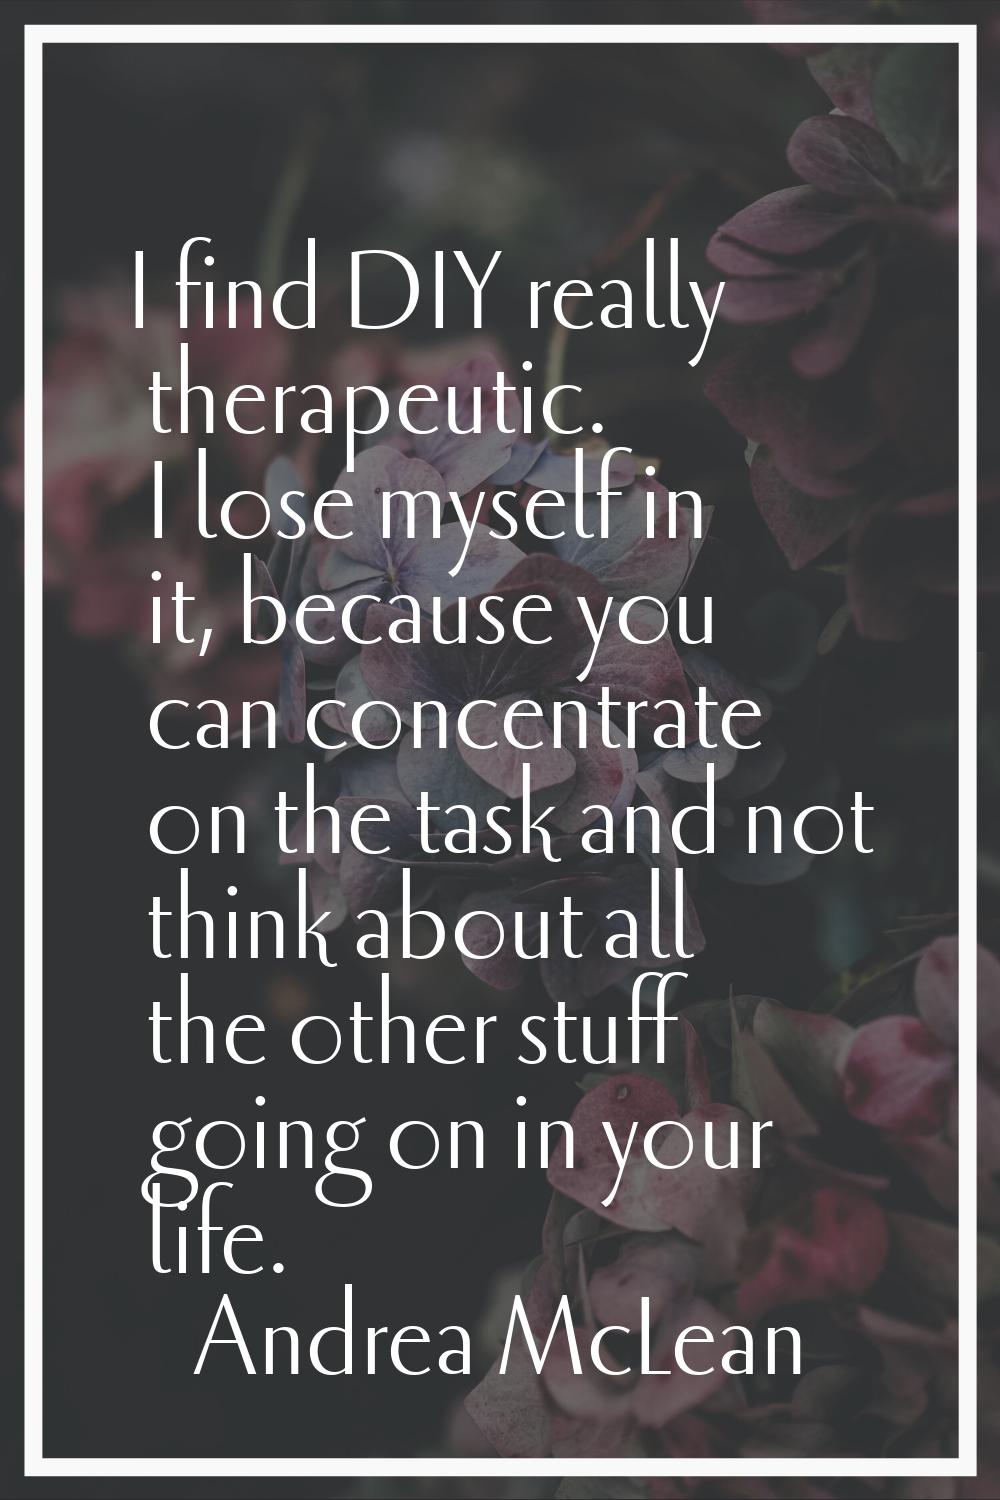 I find DIY really therapeutic. I lose myself in it, because you can concentrate on the task and not